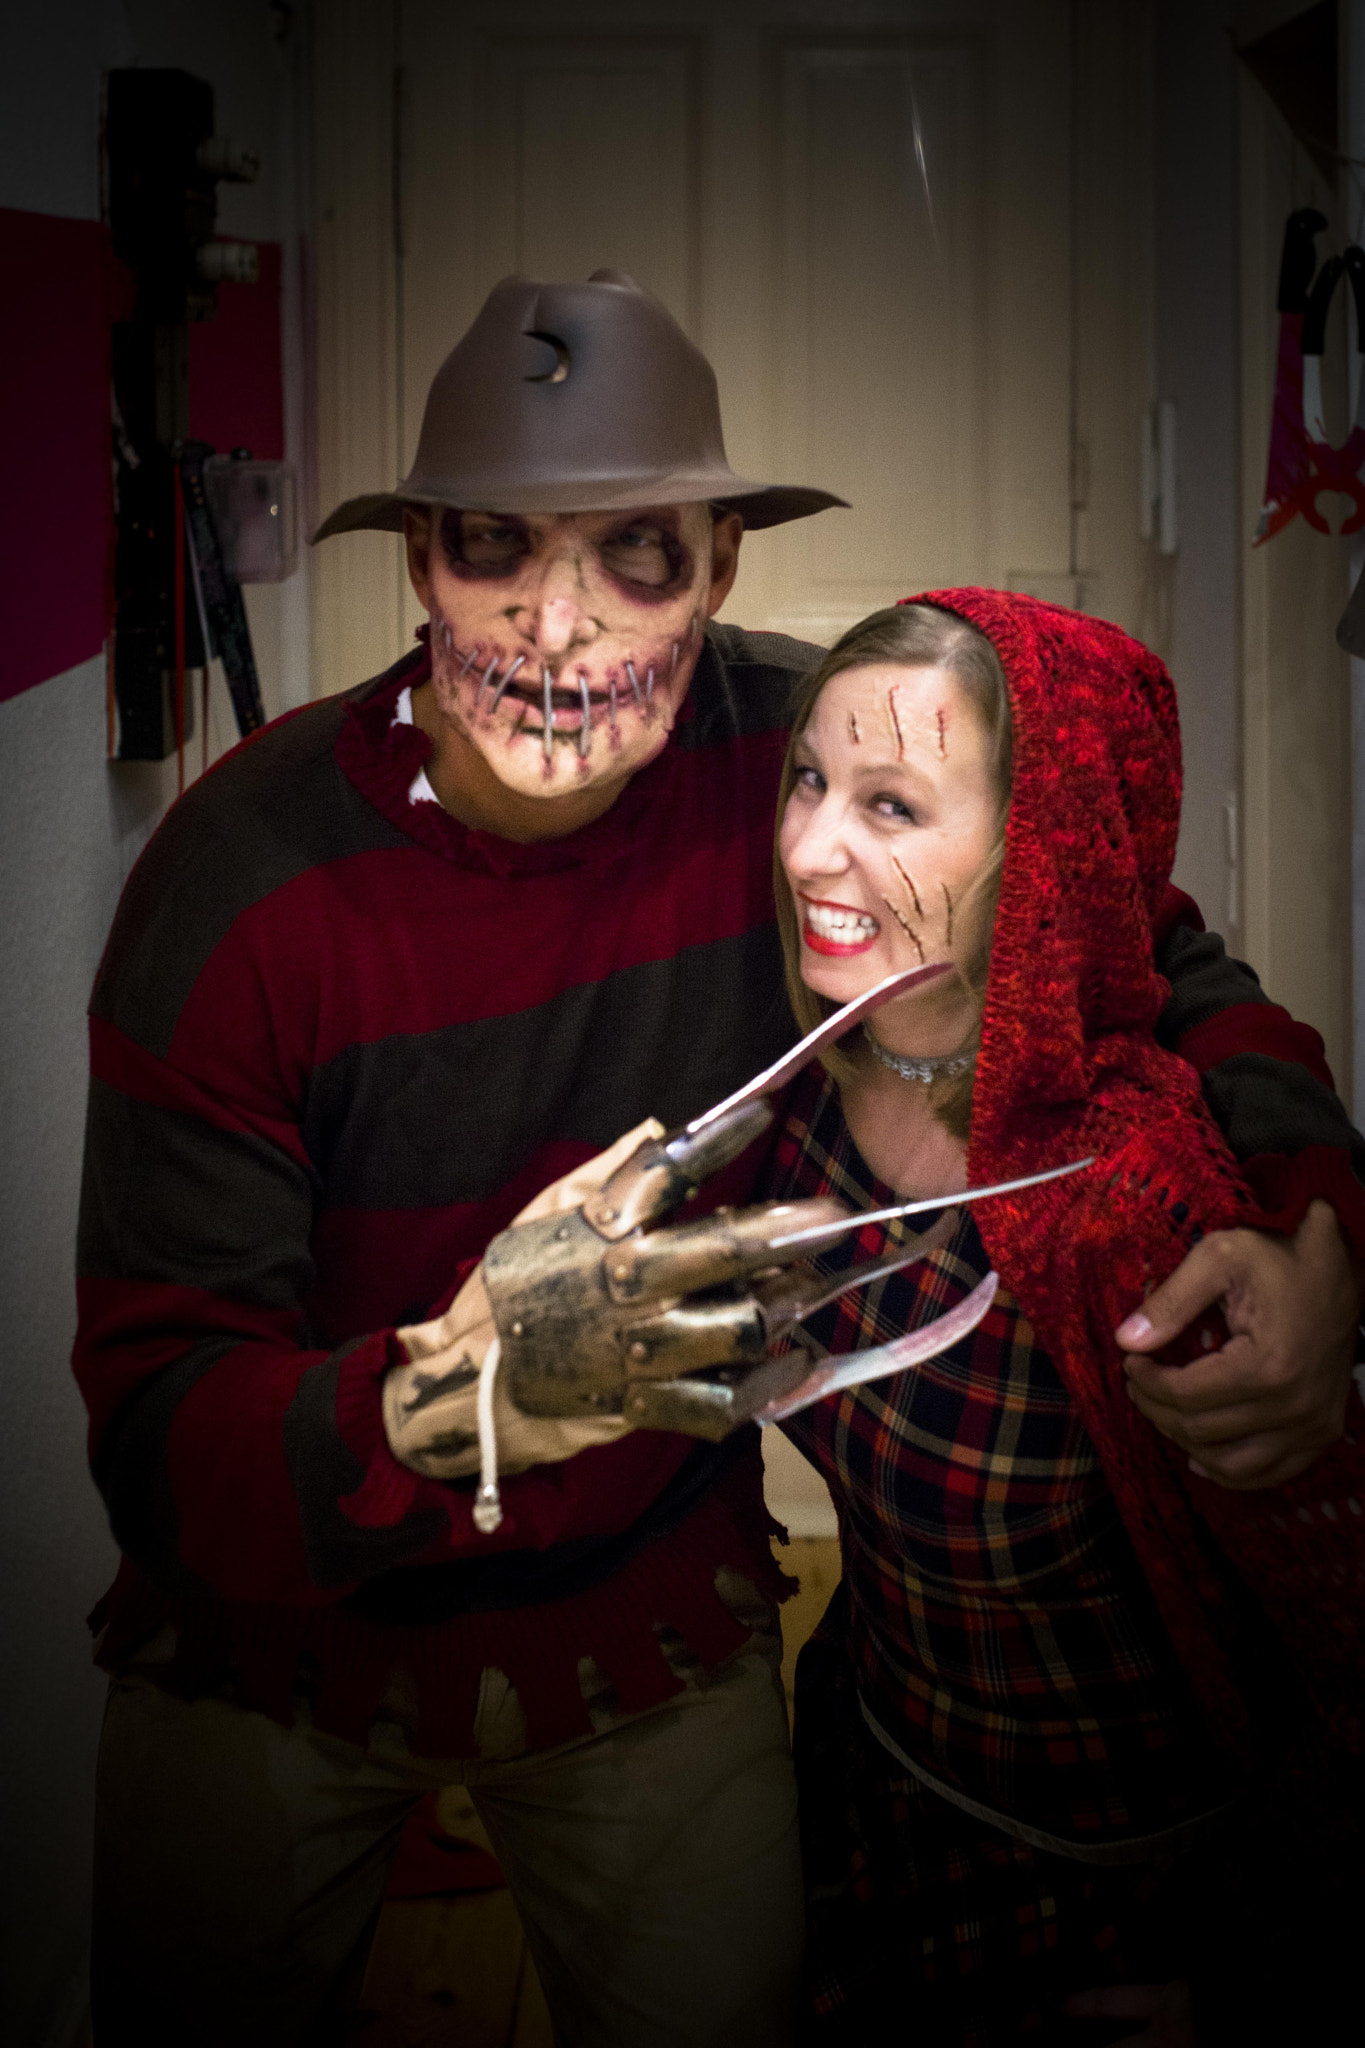 Sony SLT-A77 + Sigma 35mm F1.4 DG HSM Art sample photo. Red riding hood and freddy kruger photography